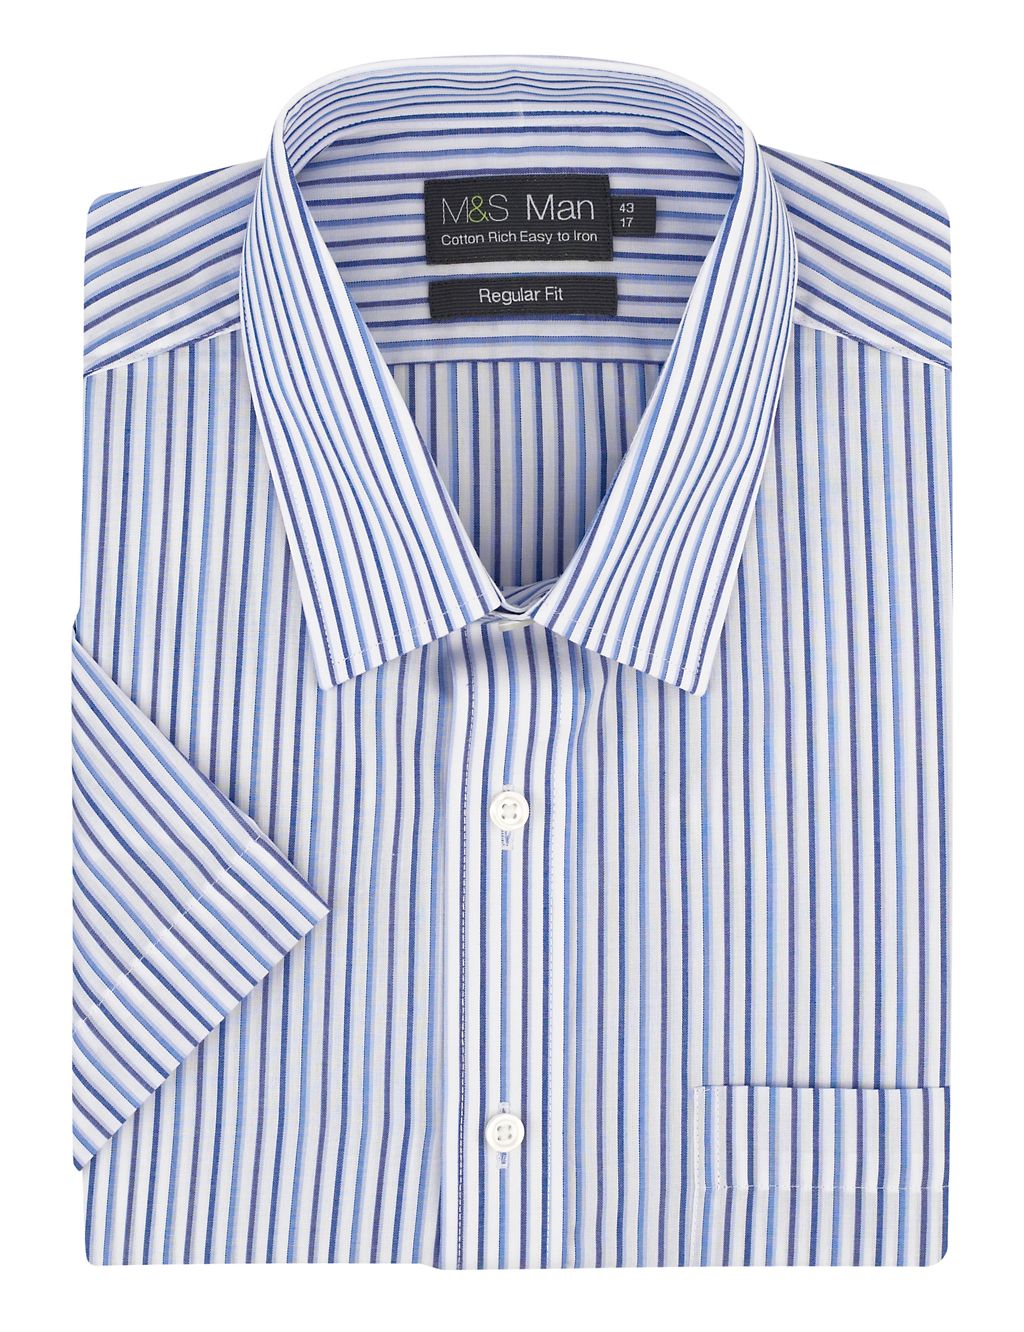 Cotton Rich Easy to Iron Short Sleeve Striped Shirt 1 of 1